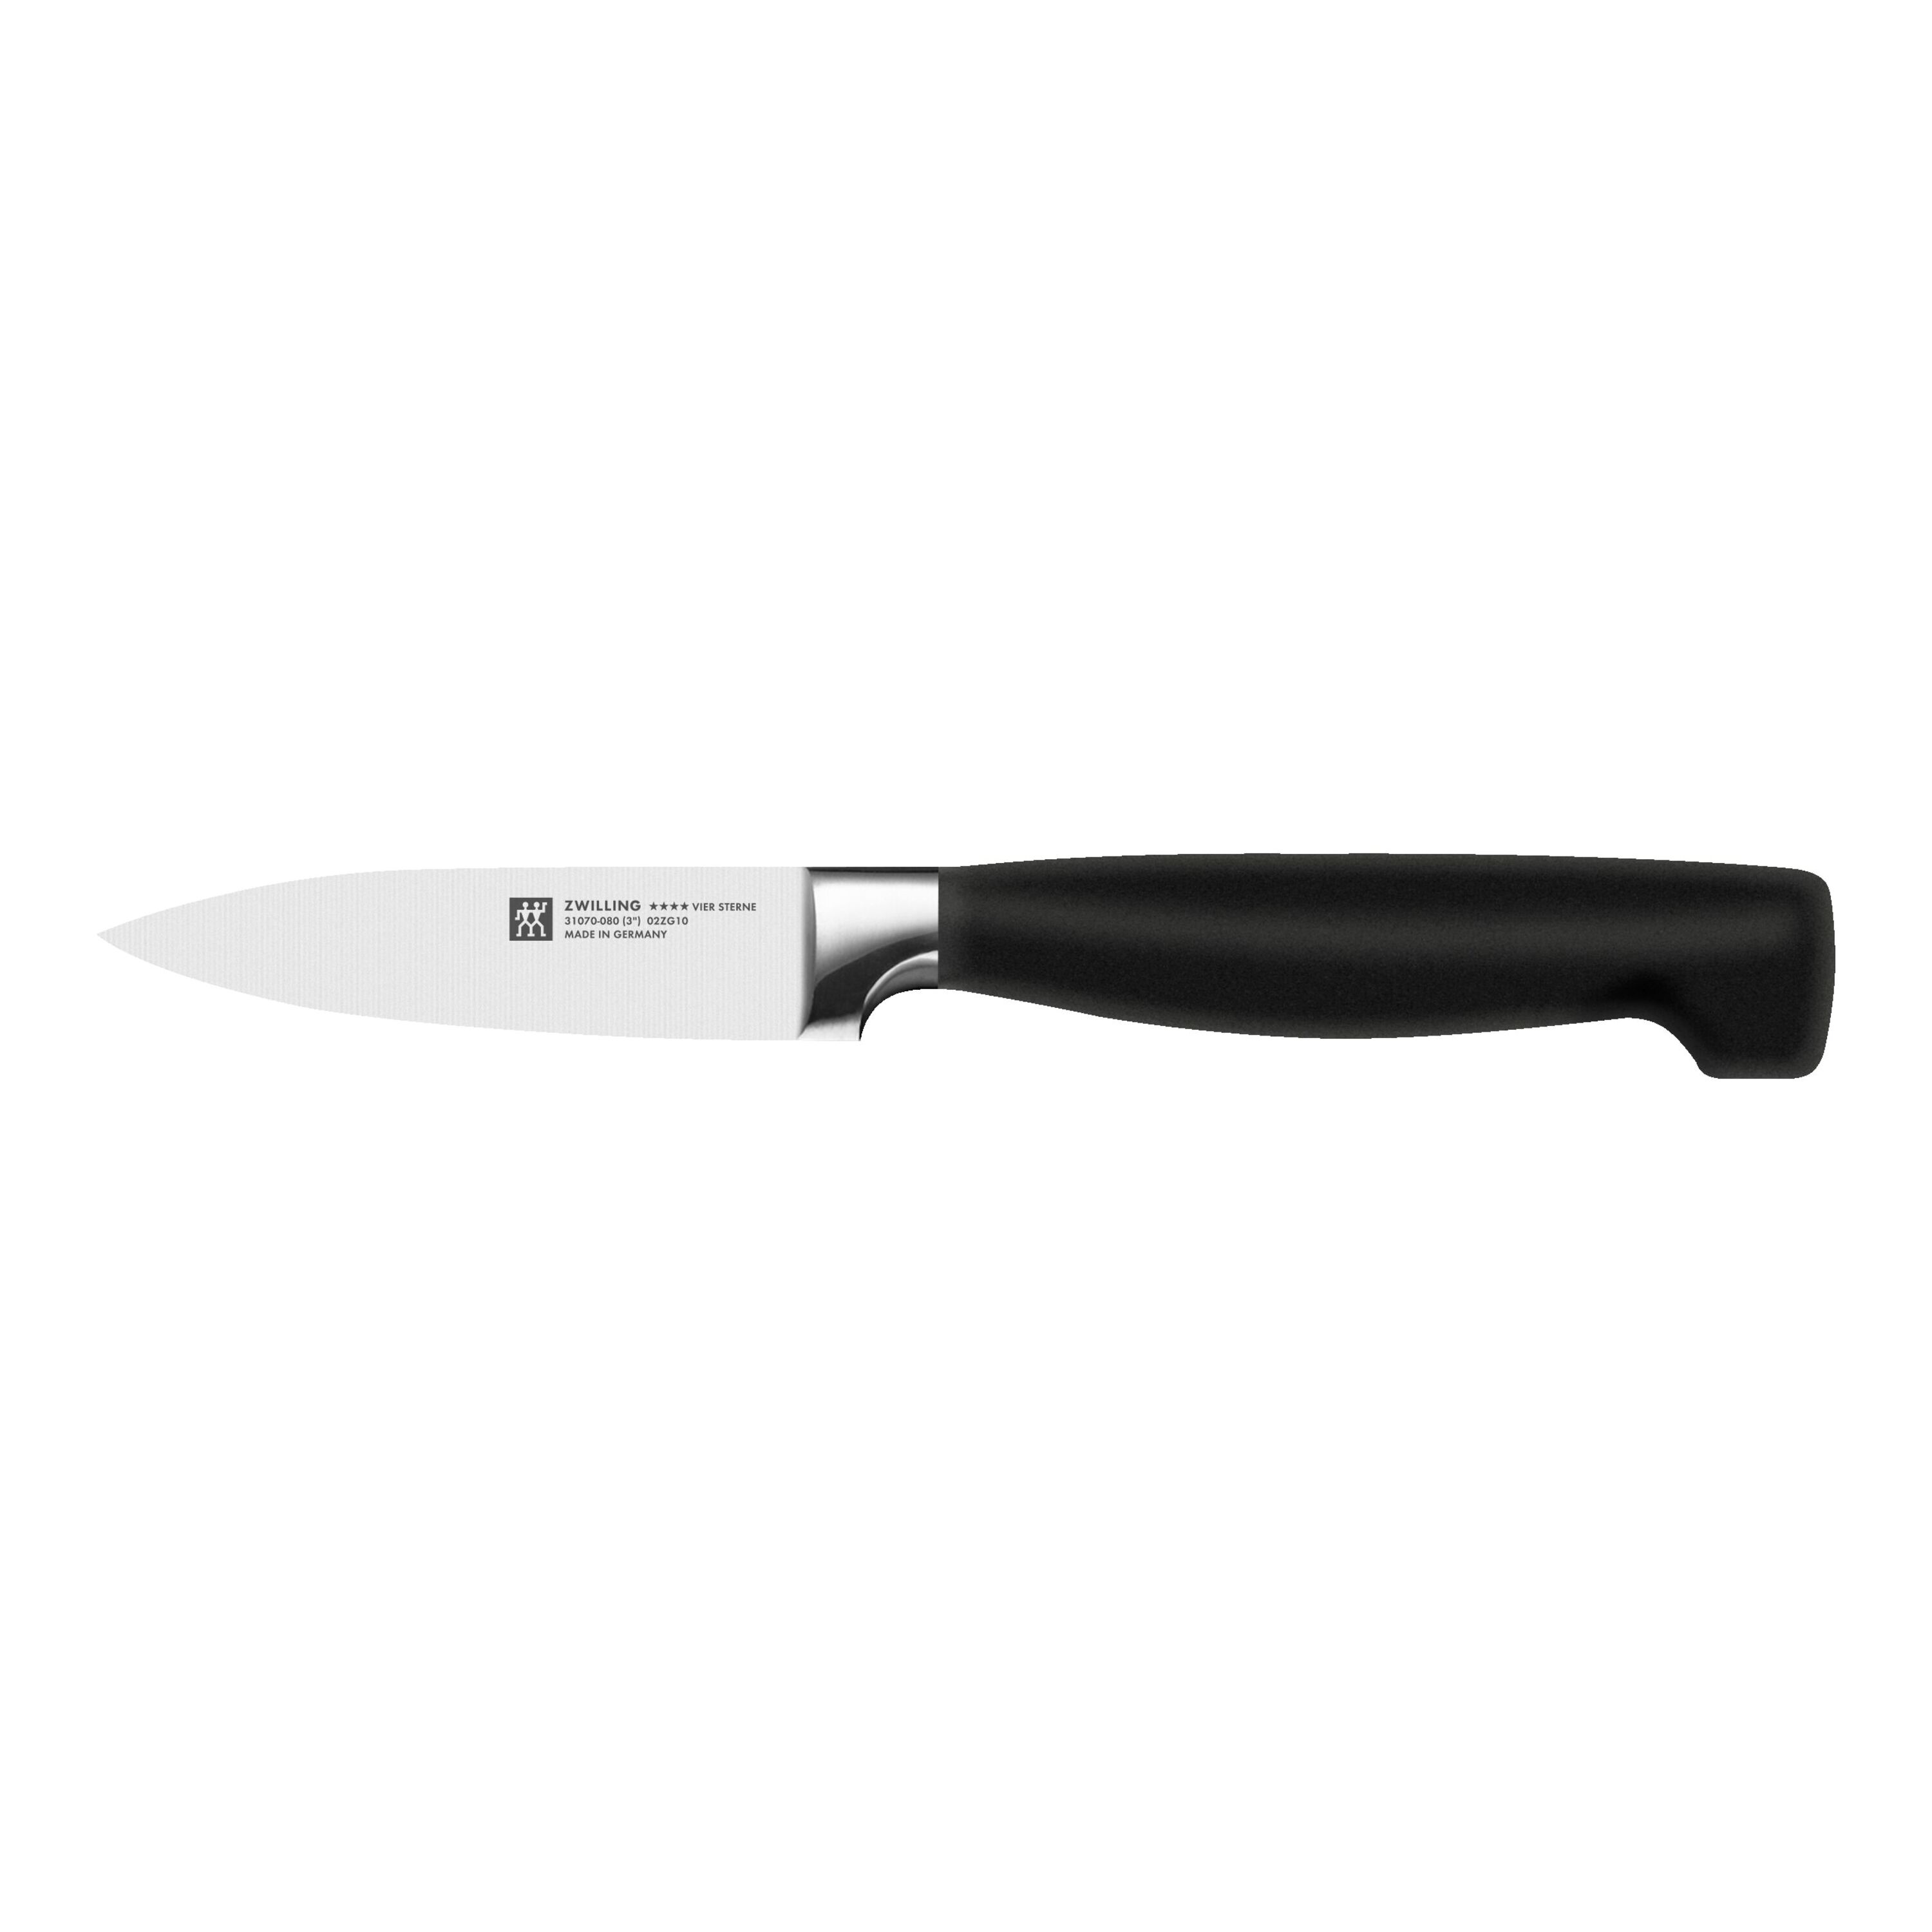 ZWILLING Four Star 3-inch